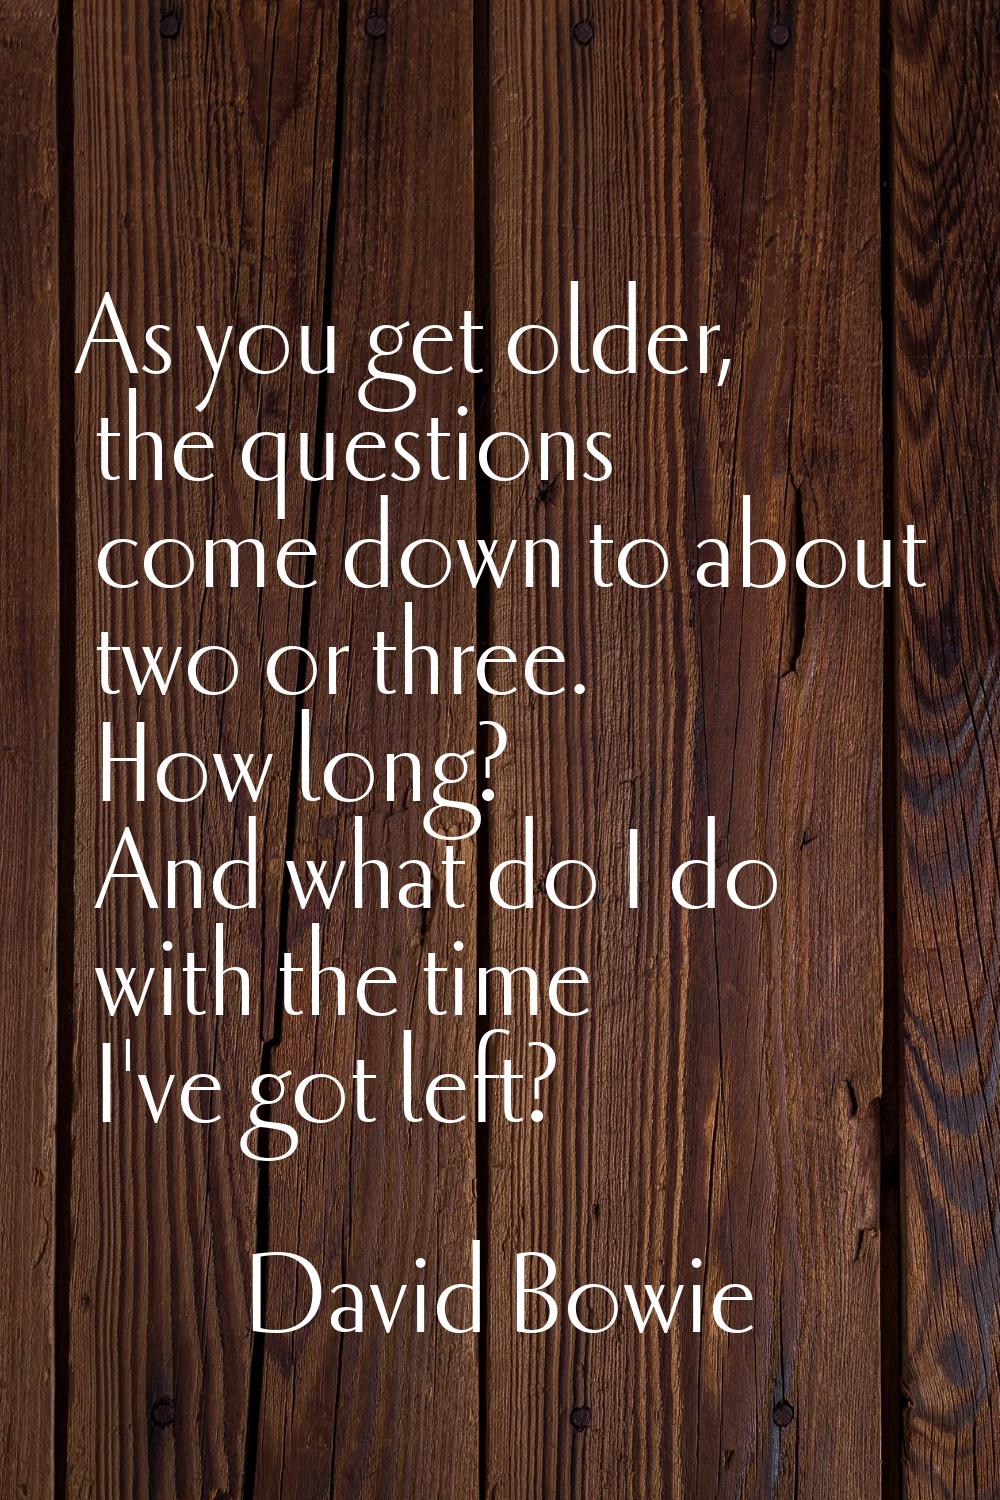 As you get older, the questions come down to about two or three. How long? And what do I do with th